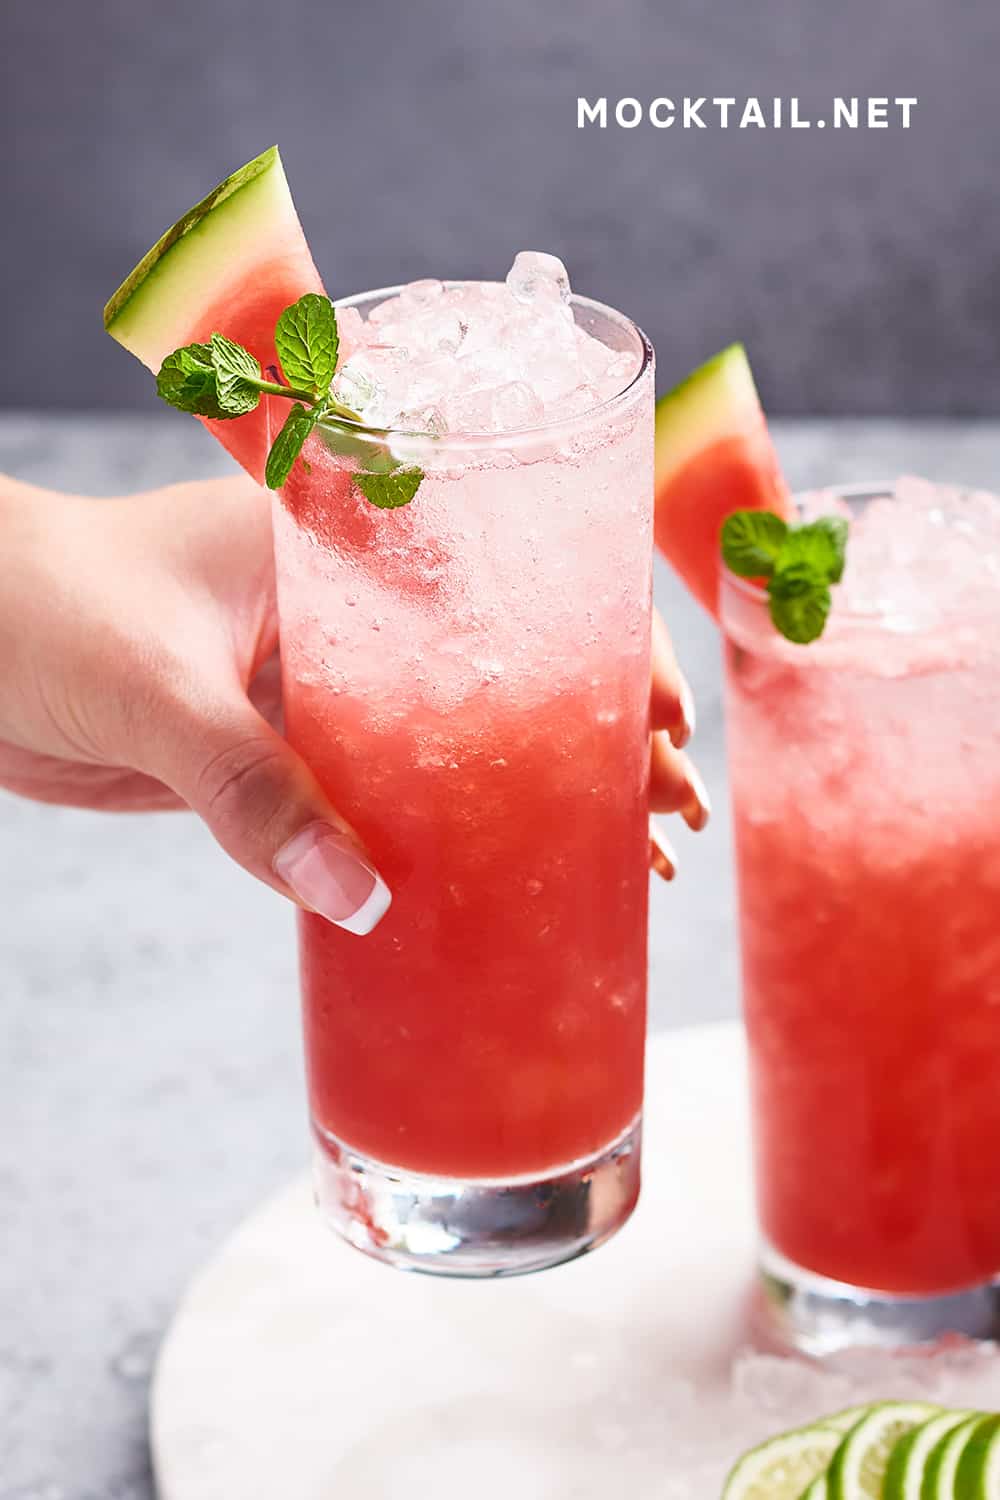 It is sure to put a smile on your face no matter when you sip on this yummy mocktail.